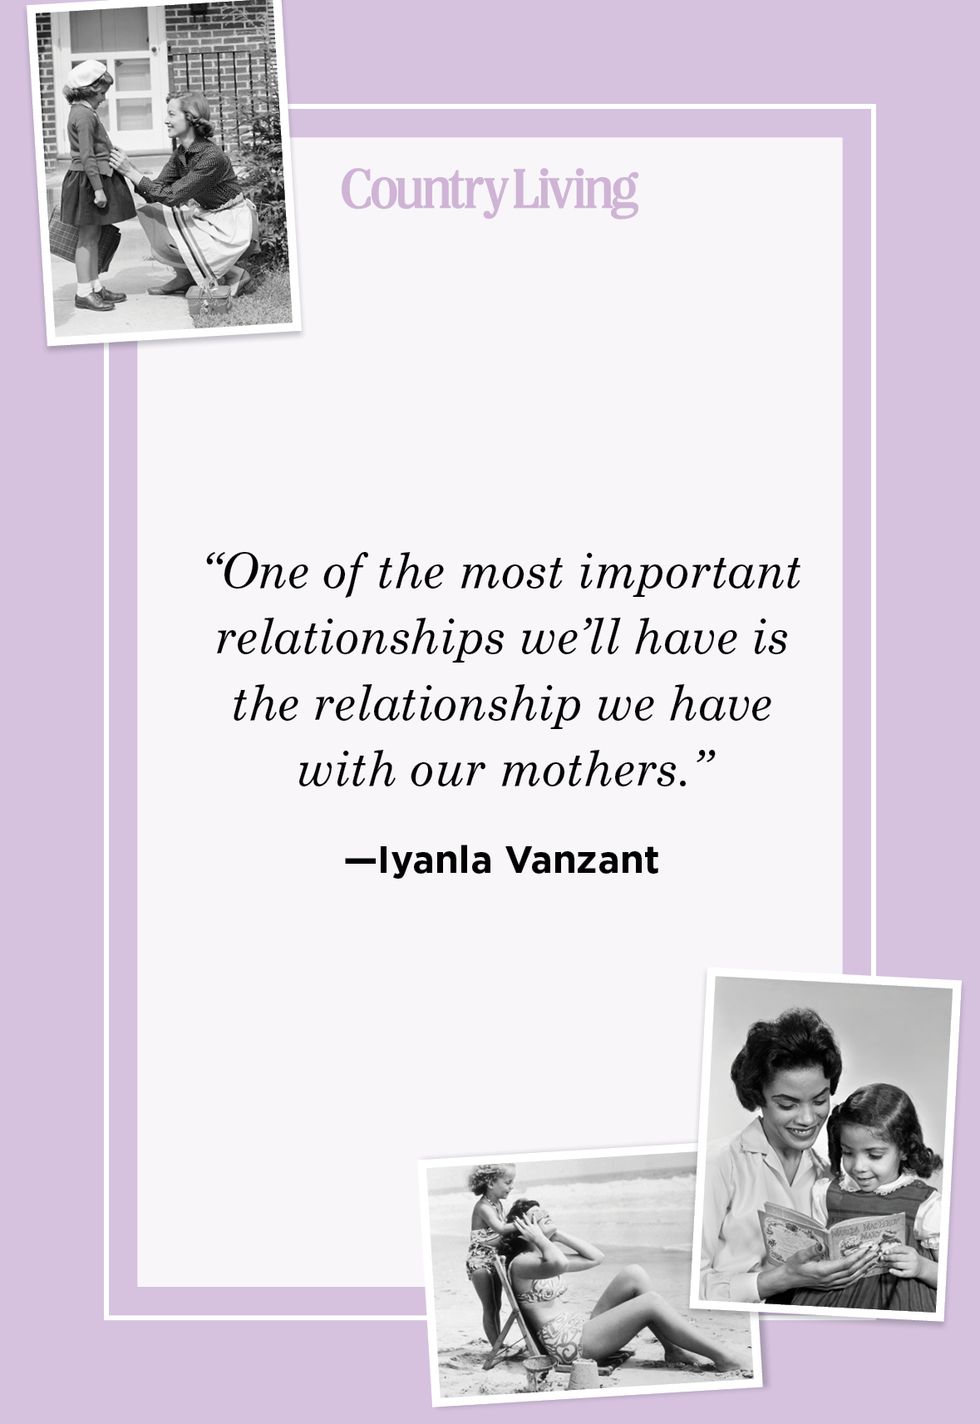 mother's day quote by iyanla vanzant